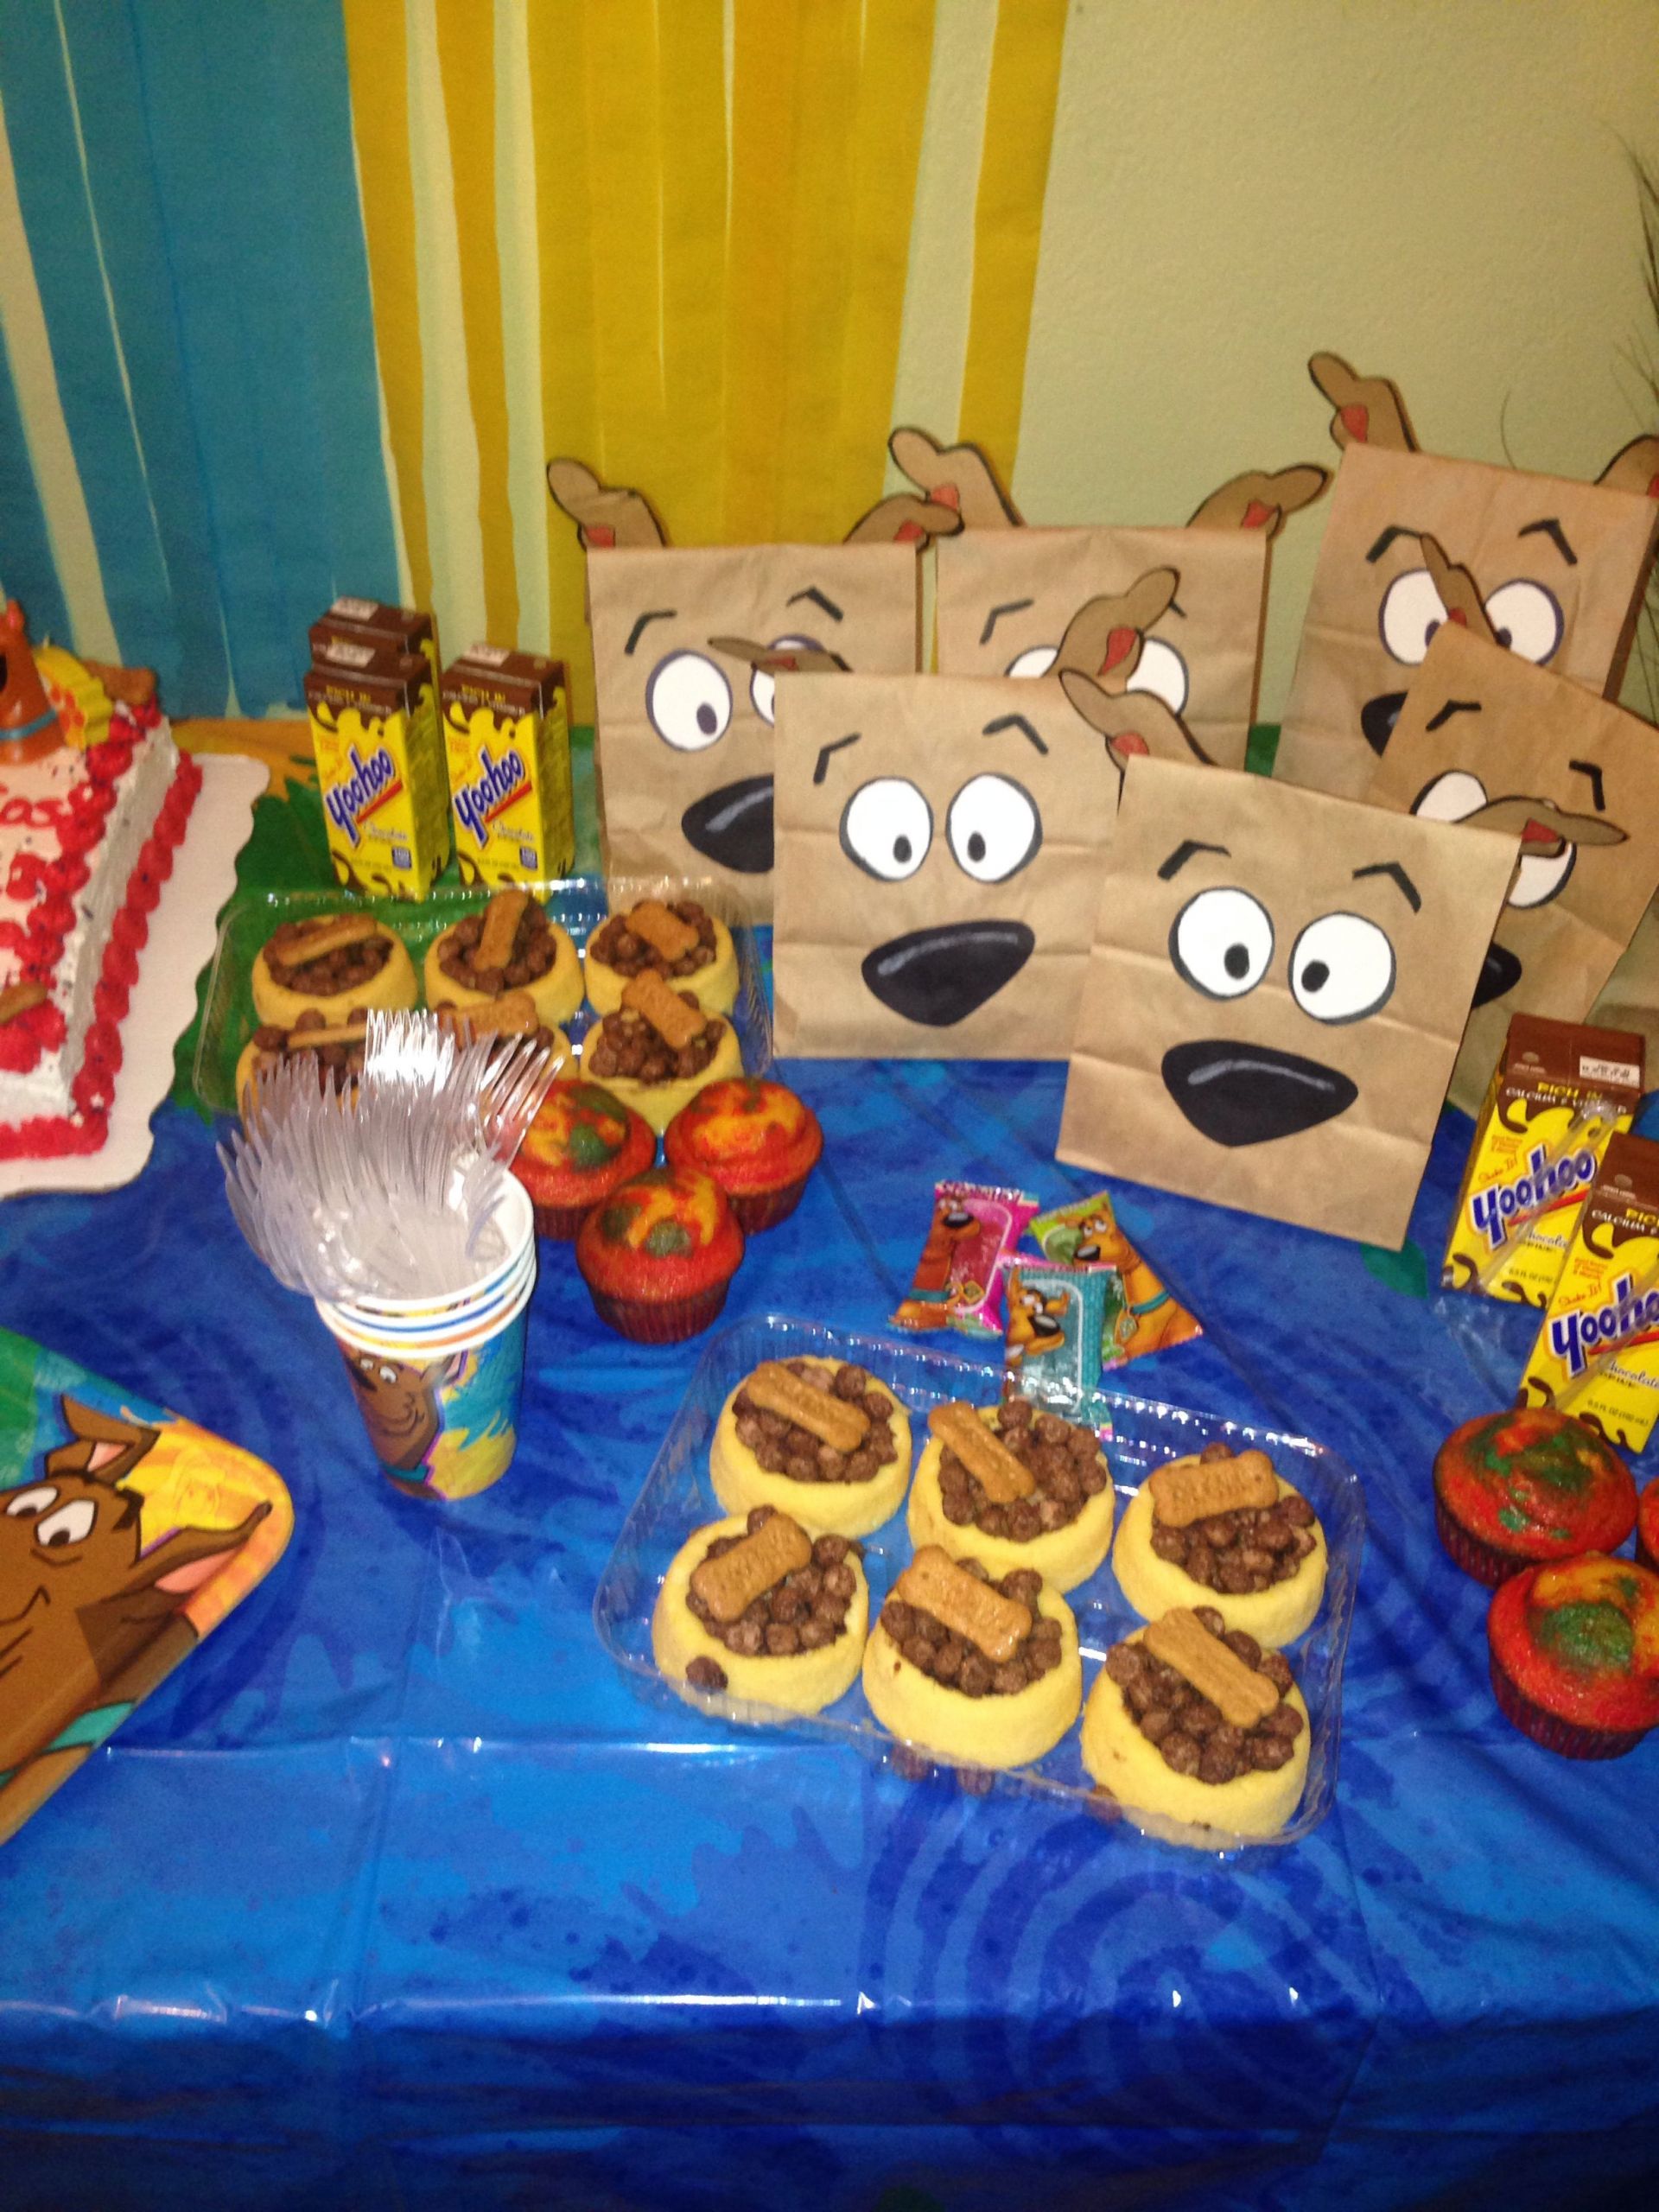 Scooby Doo Birthday Decorations
 Scooby doo party Party time